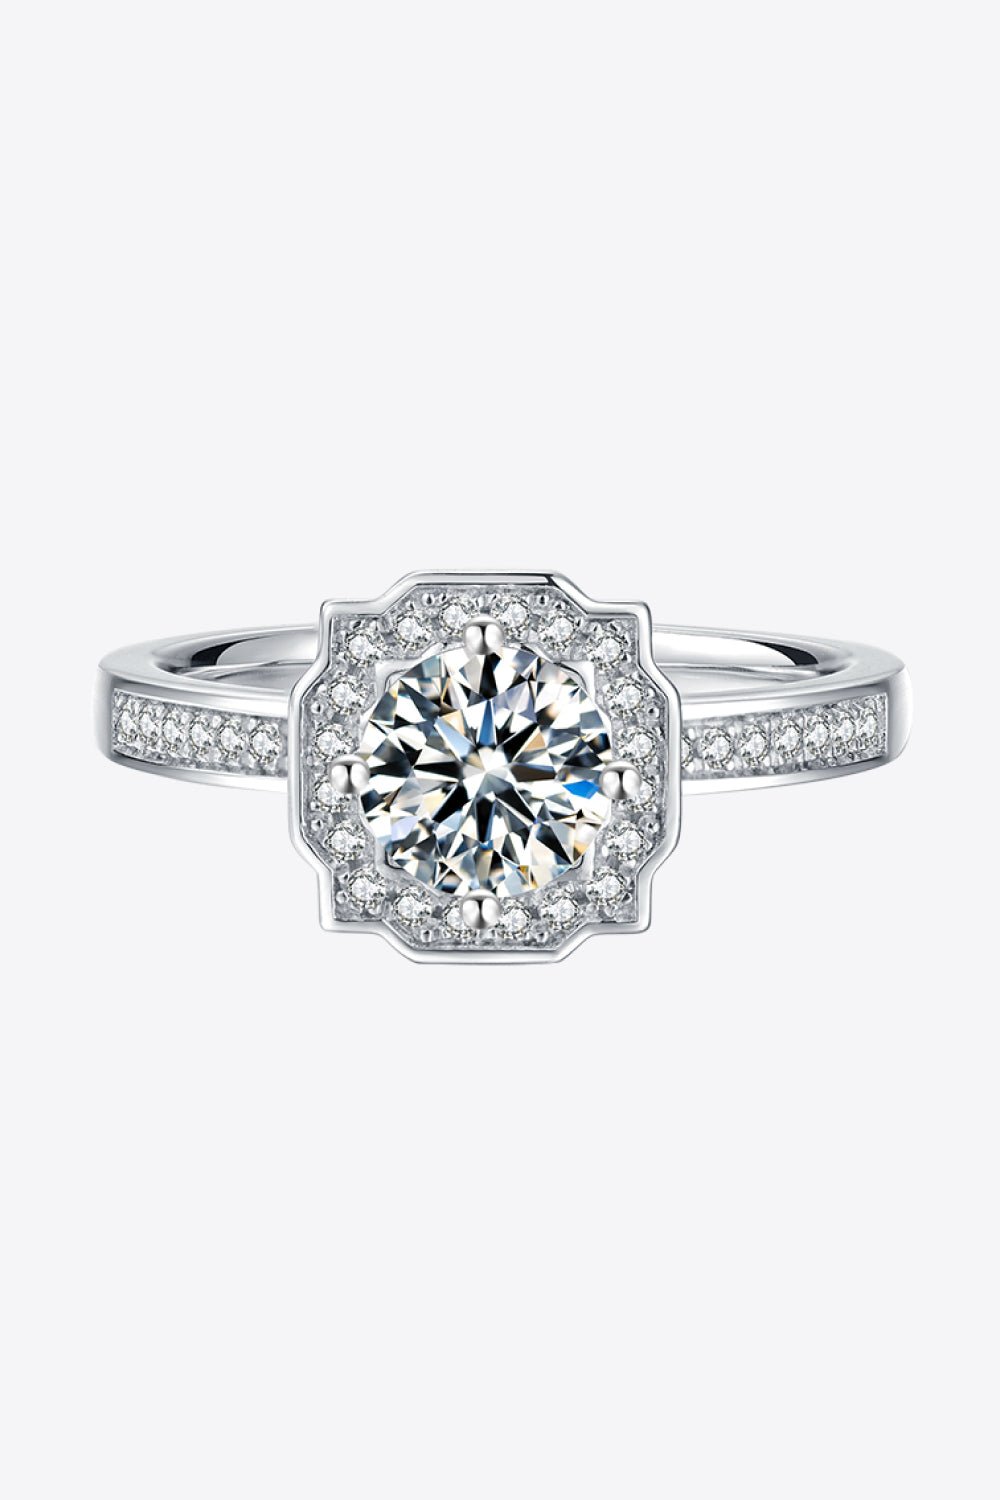 1 Carat Moissanite 925 Sterling Silver Halo Ring - EMMY